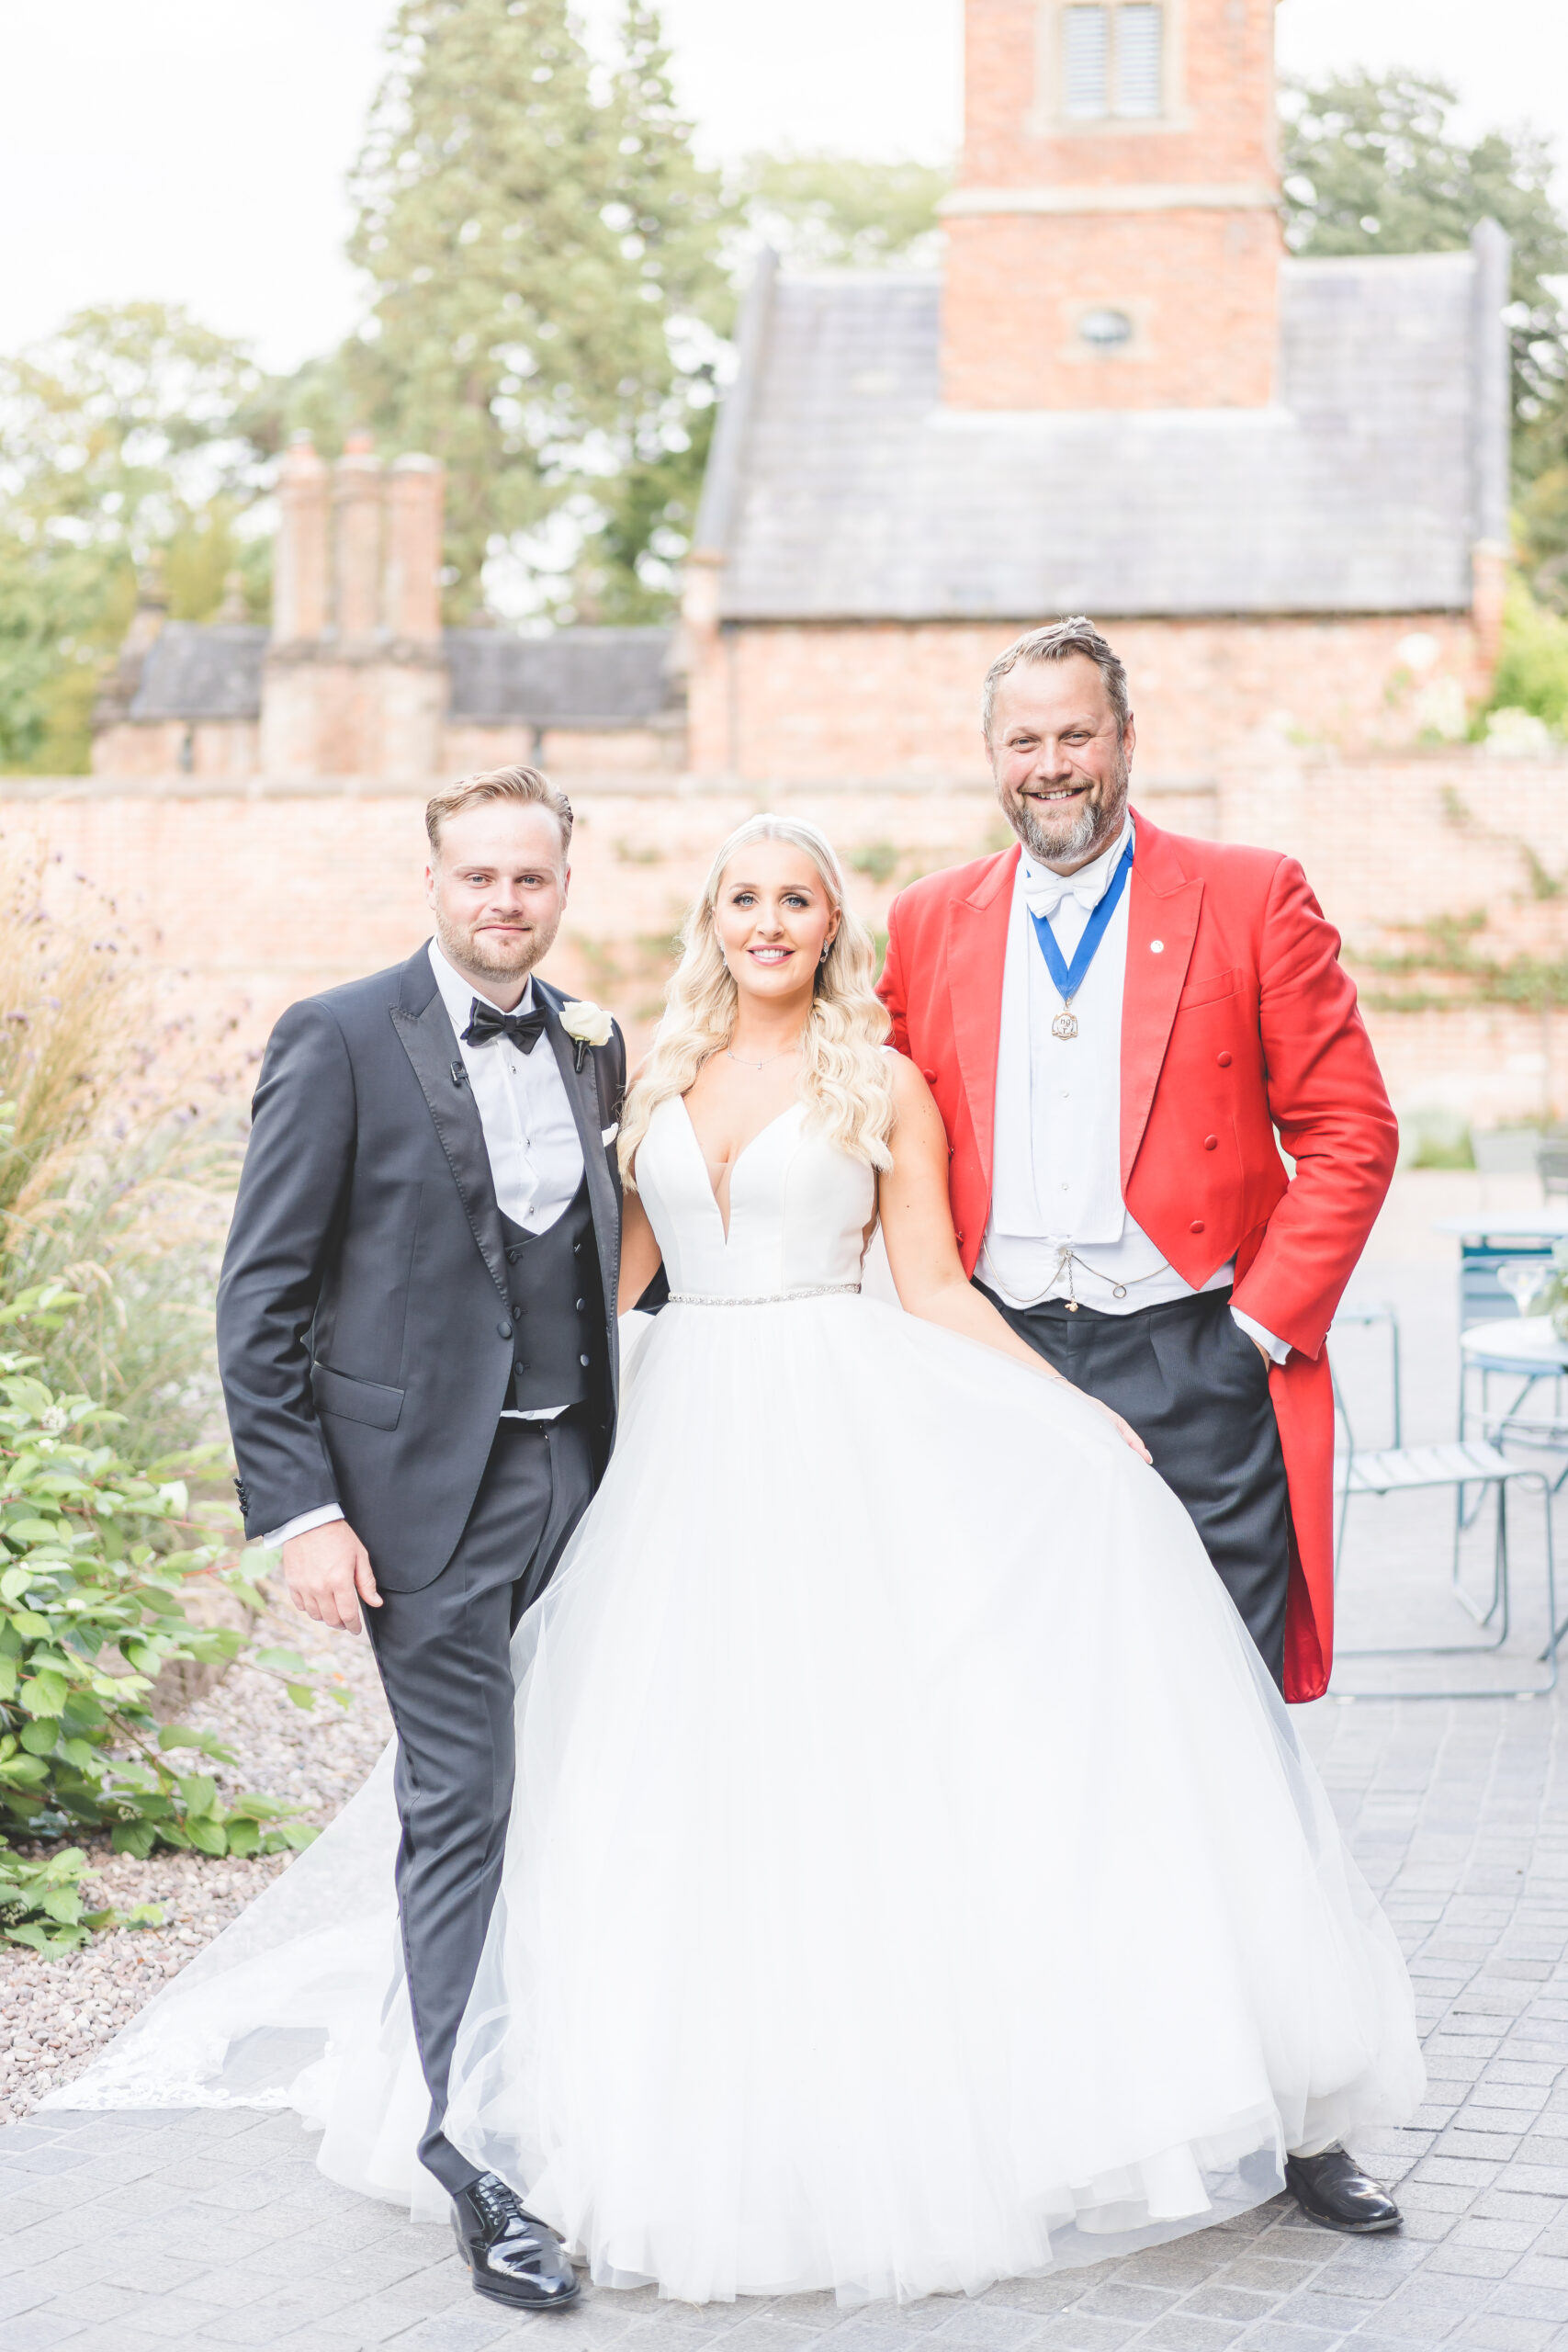 Stefan, The Tall Toastmaster at Dorfold Hall Wedding